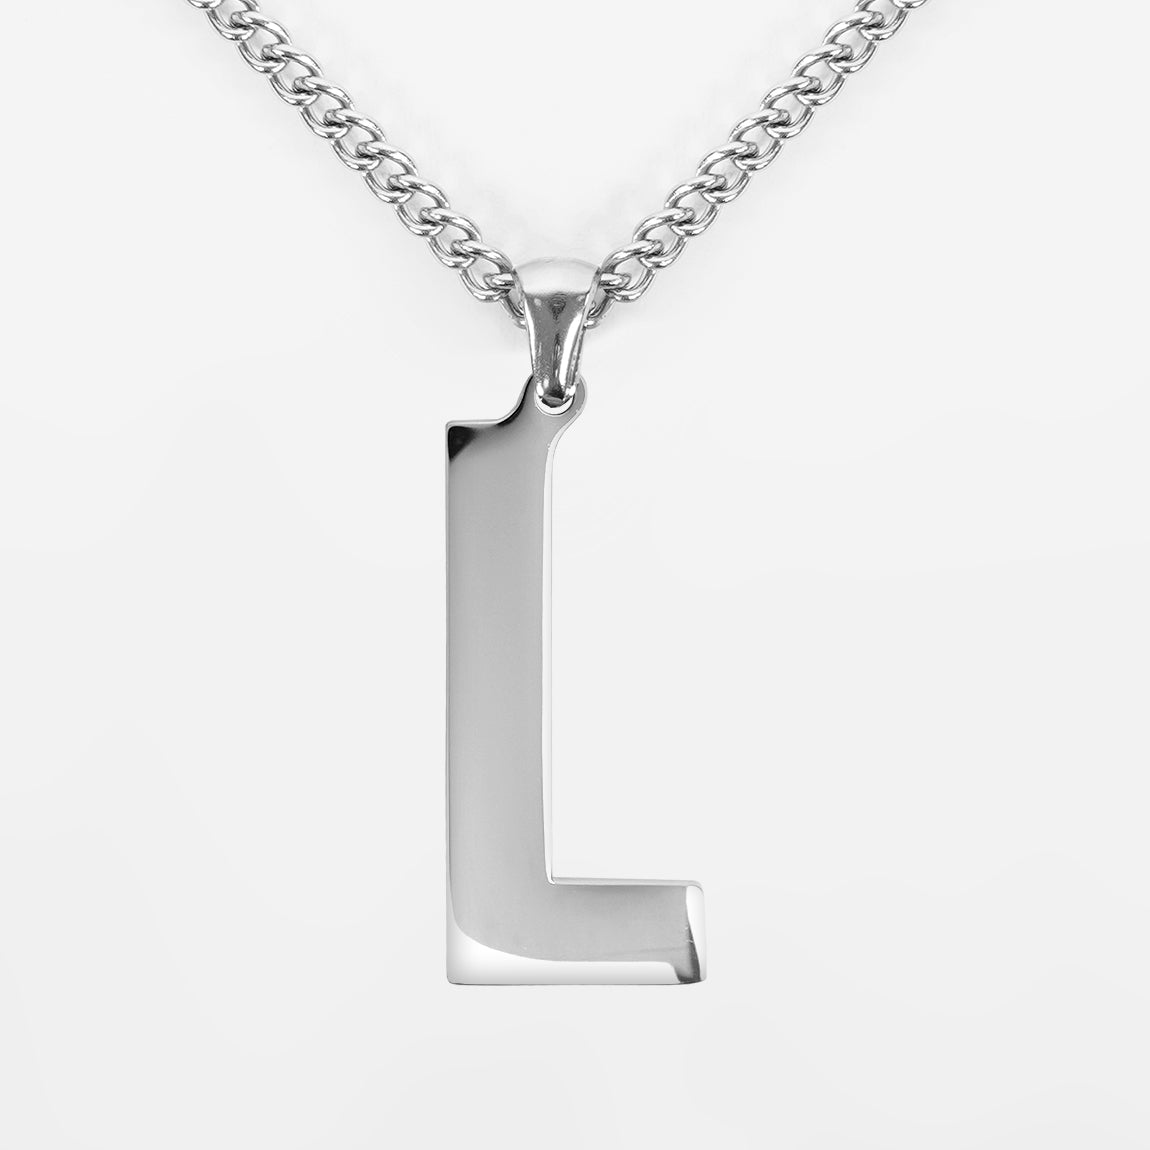 L Letter Pendant with Chain Necklace - Stainless Steel